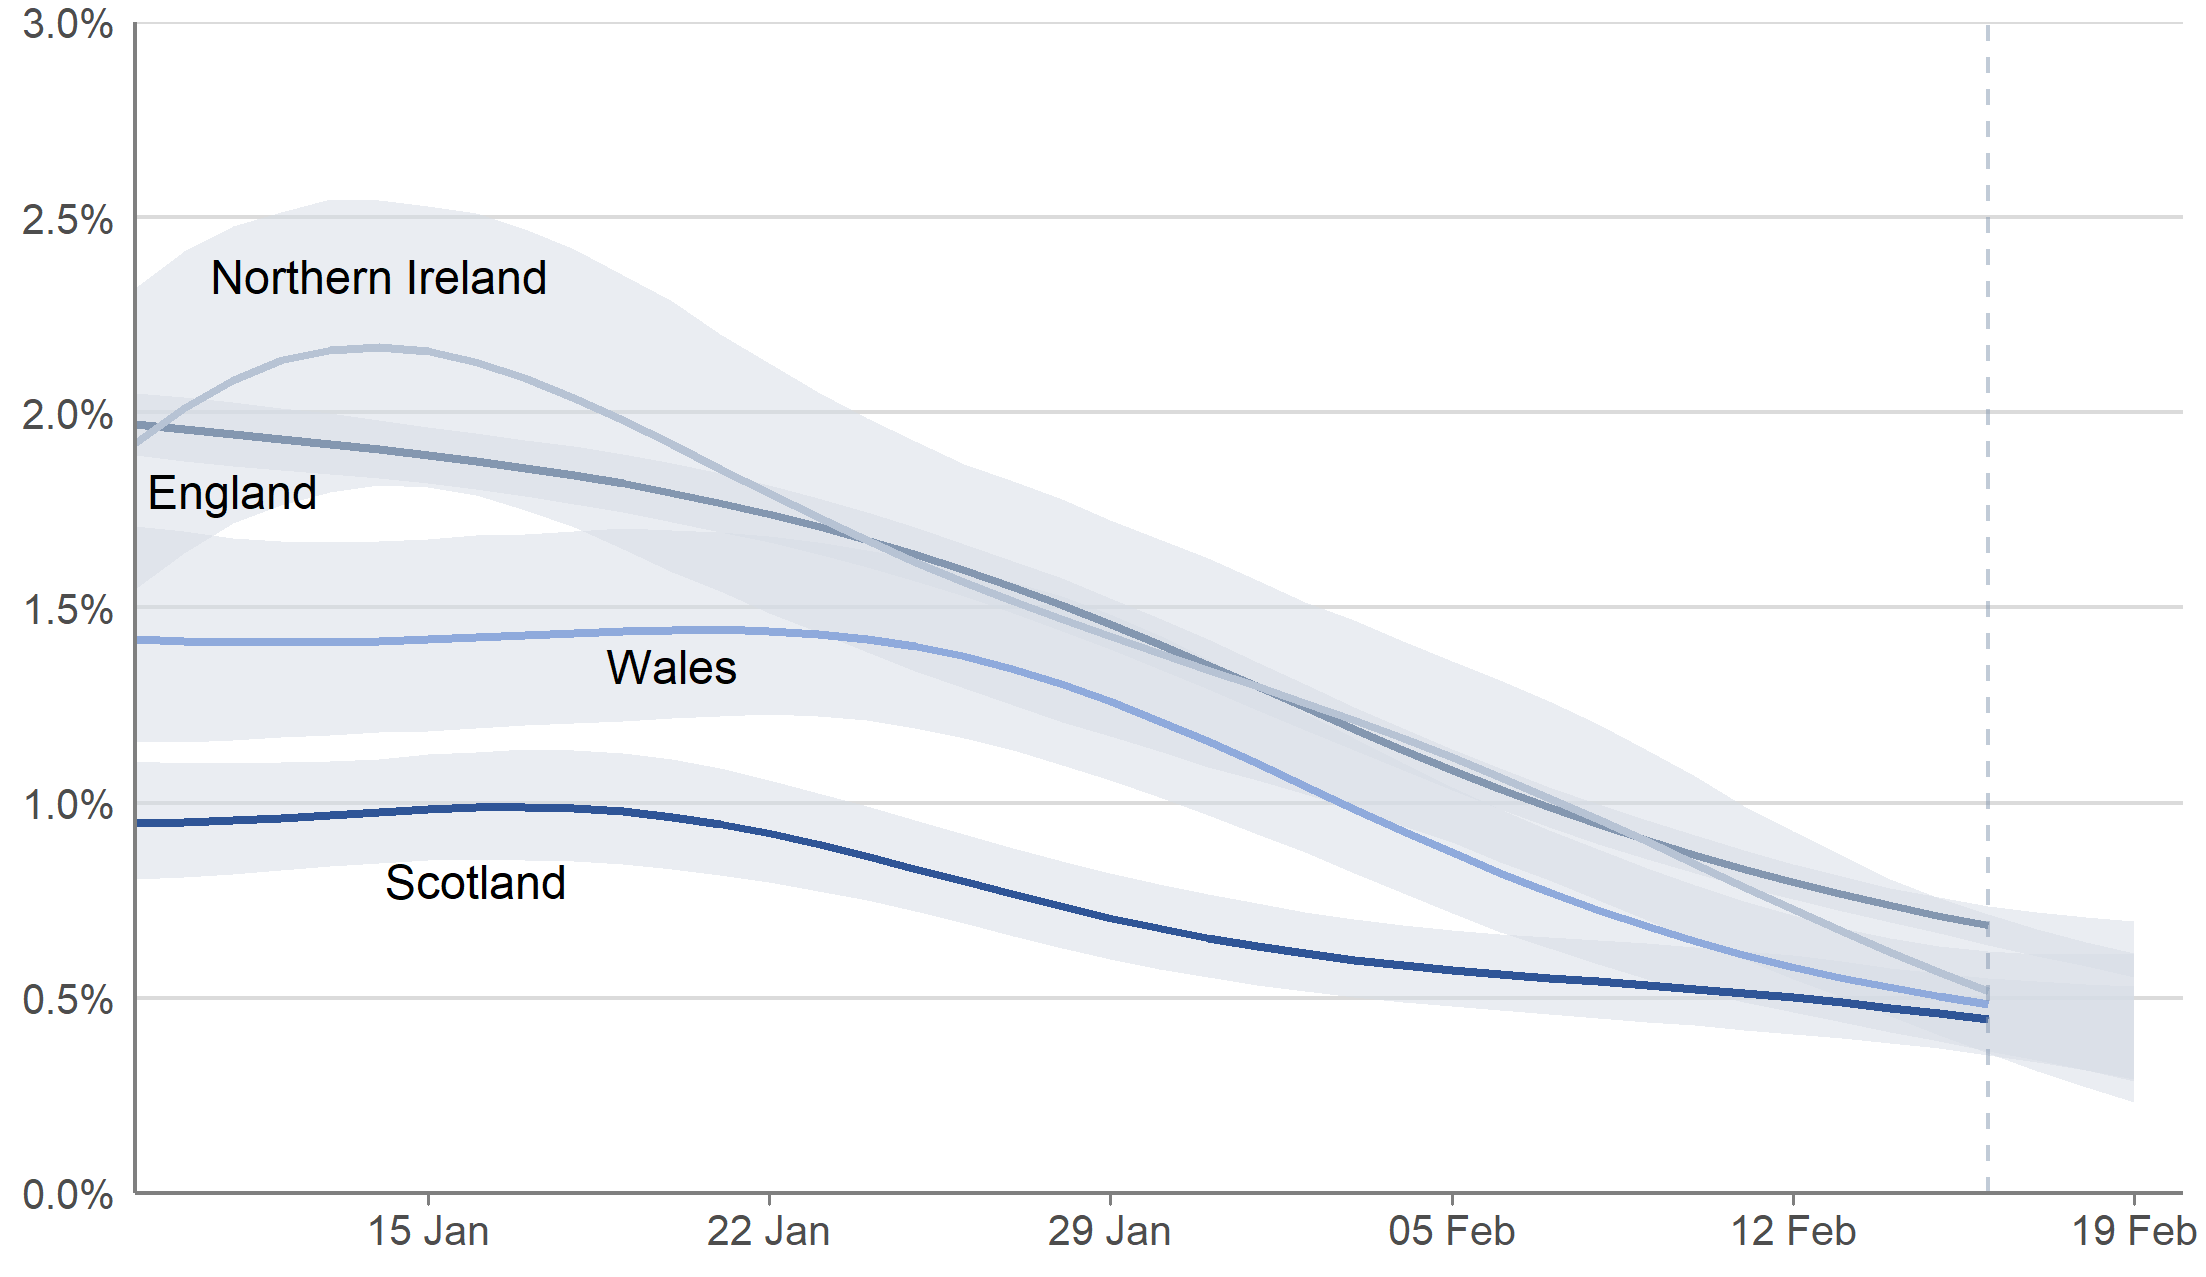 Modelled estimates of the percentage of the population testing positive for COVID-19 in each of the four nations of the UK, between 9 January and 19 February 2021 including 95% credible intervals (See notes 1,3,4,5,6)